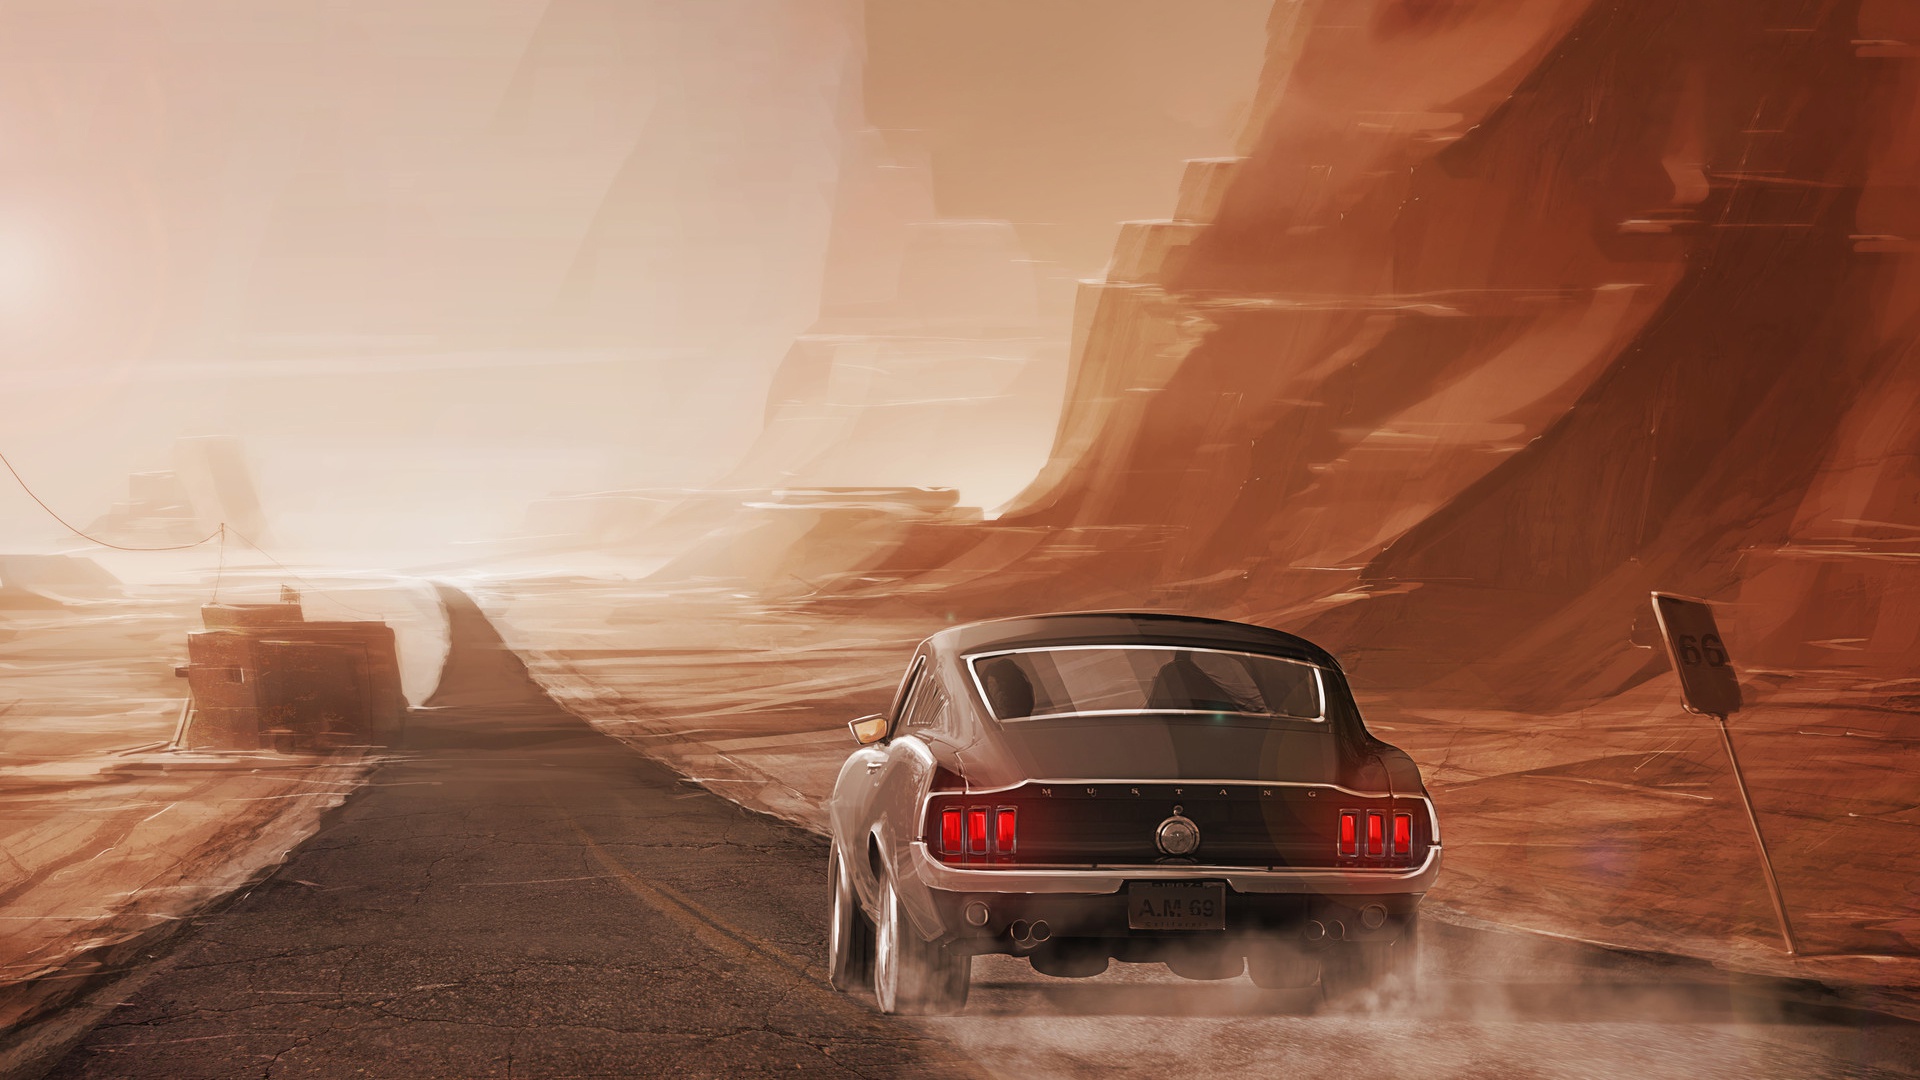 General 1920x1080 Ford Mustang car vehicle road asphalt artwork landscape Ford muscle cars American cars